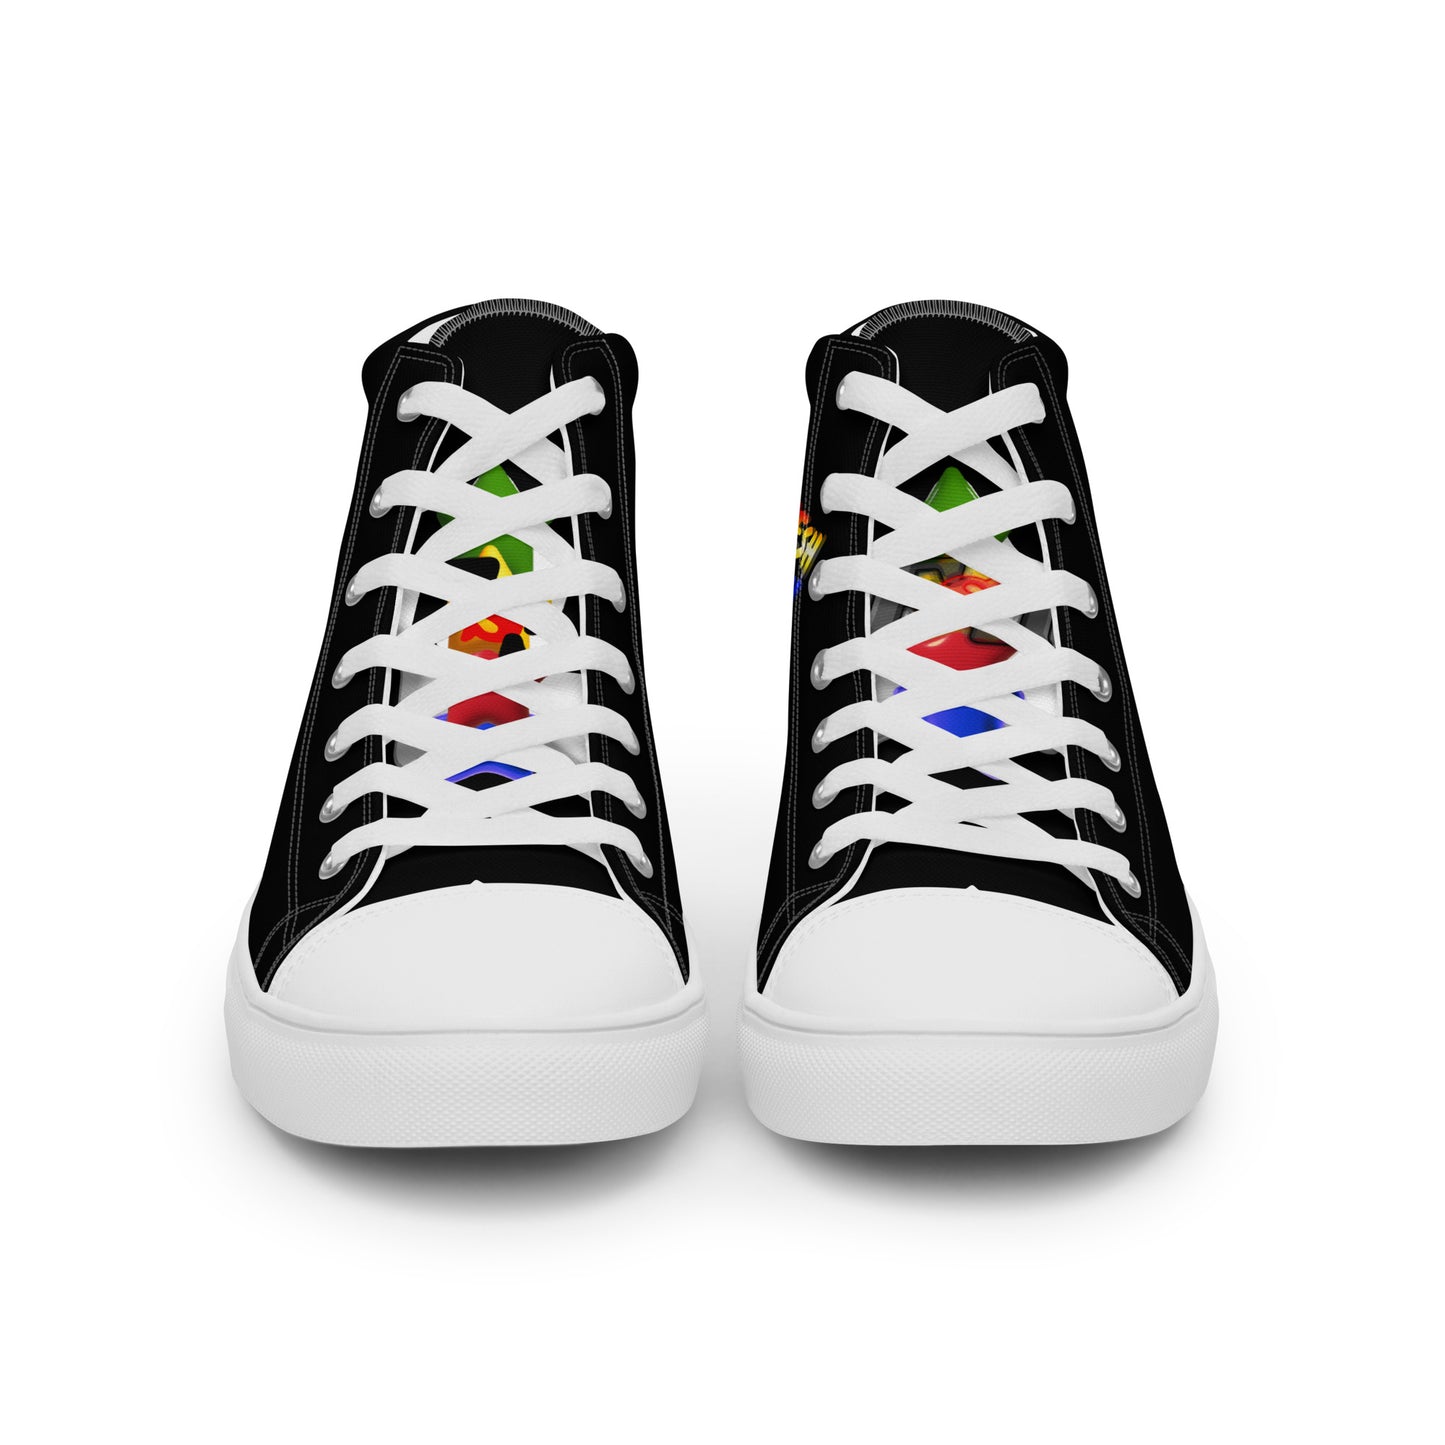 Men’s high top canvas shoes - FSF Stacked 'White Star' Black